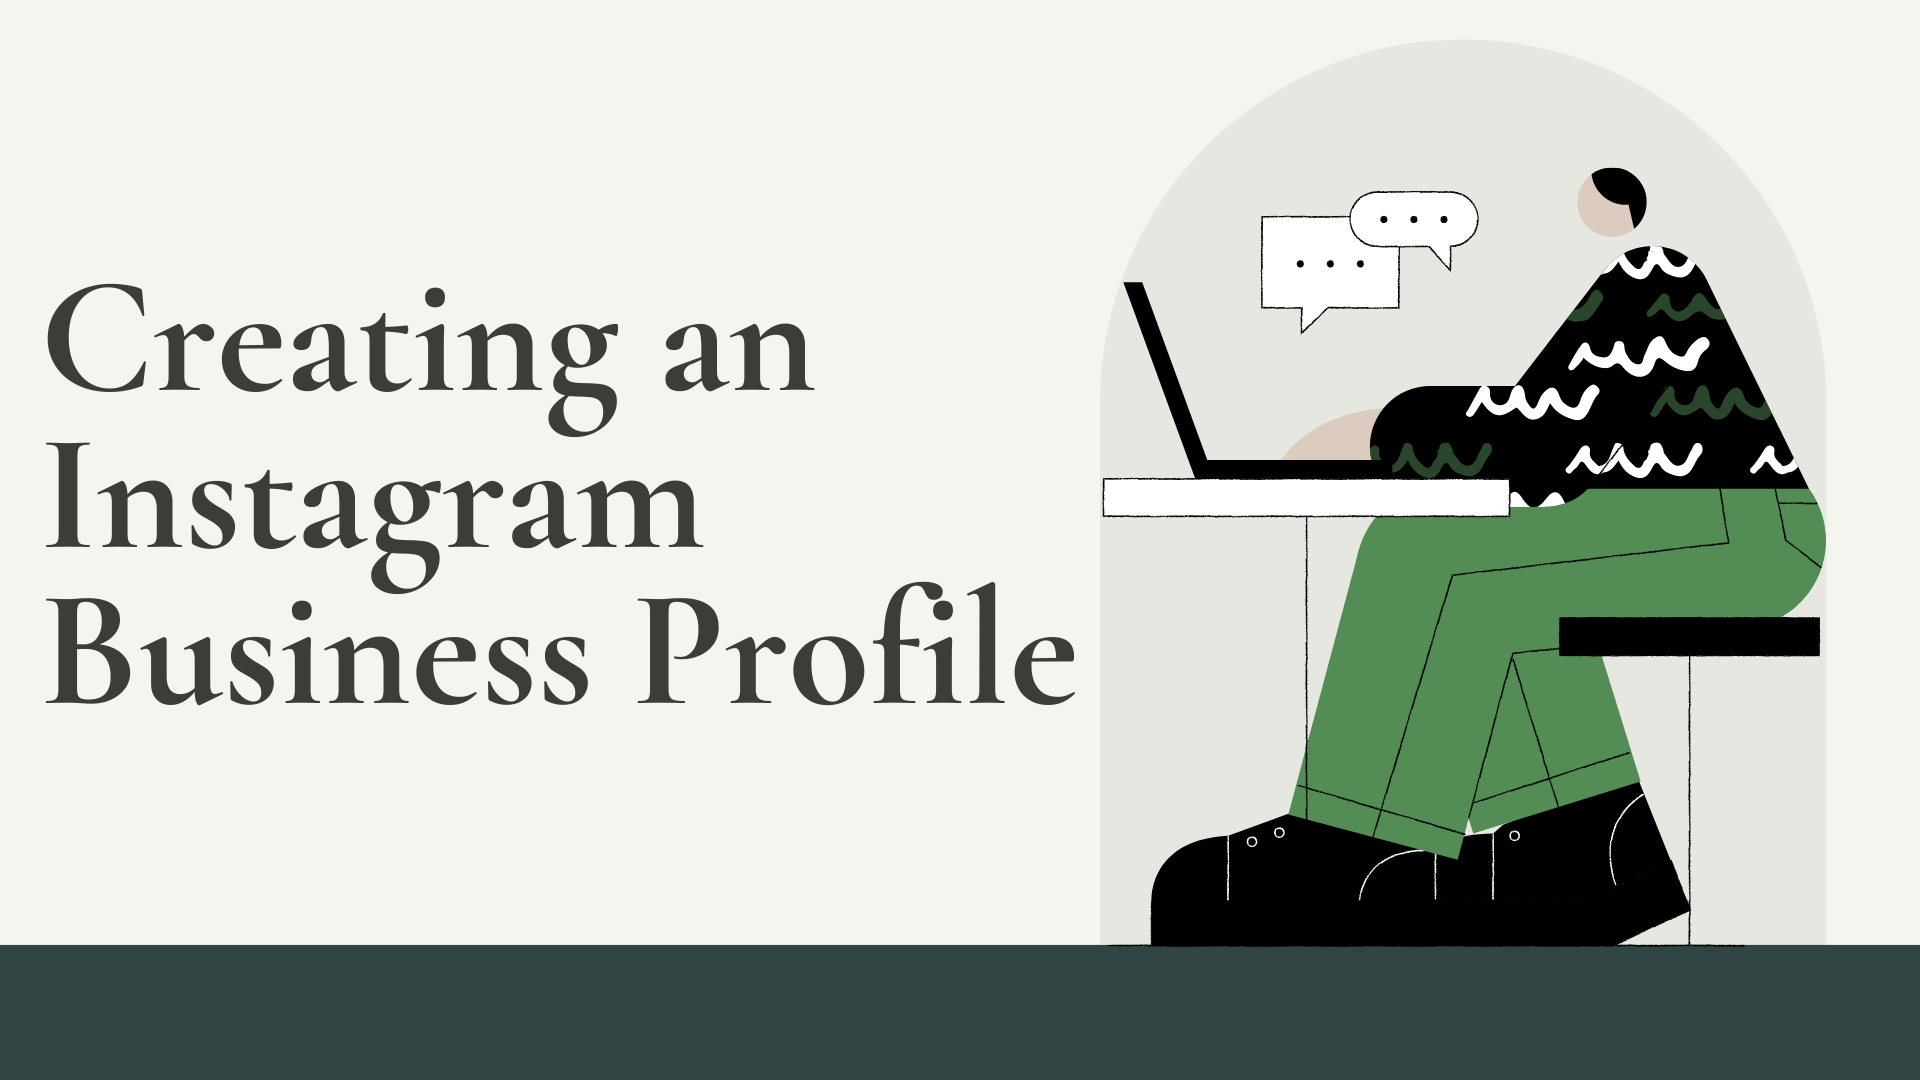 How to create an Instagram Business Profile